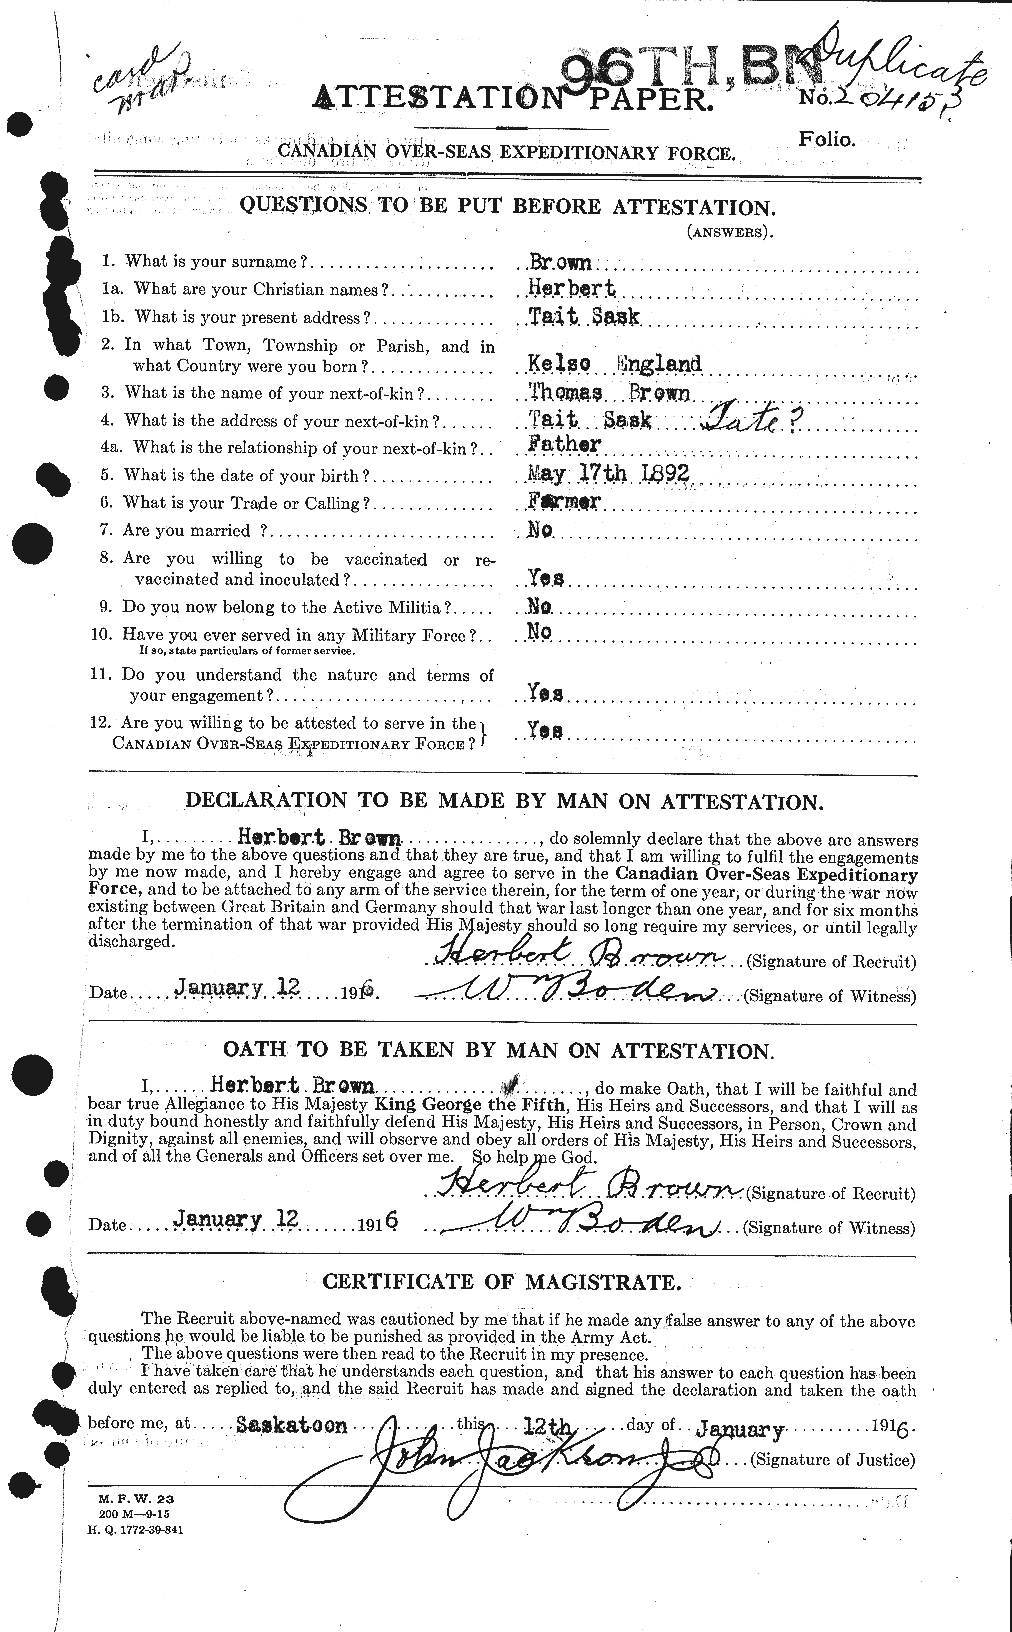 Personnel Records of the First World War - CEF 265548a